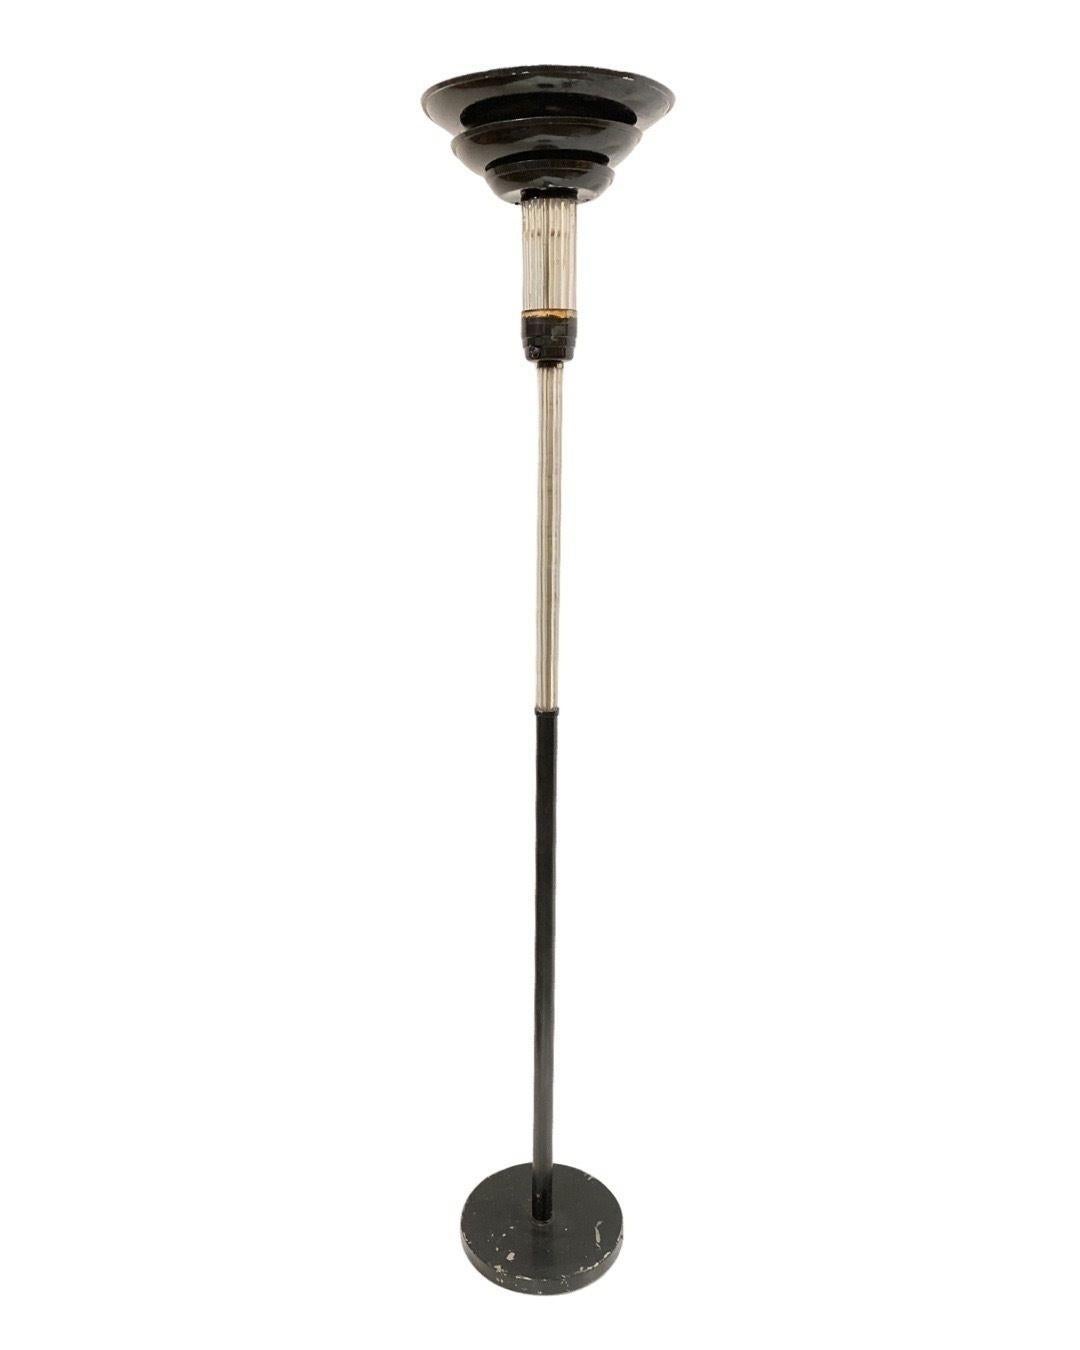 Pair of Streamline art deco glass rod torchiere floor lamps each featuring a black enameled base with a mixed glass rod and steel center rod with 3 Tier Black enameled spun aluminum shade and Glass rod stem.
 
Circa 1930.